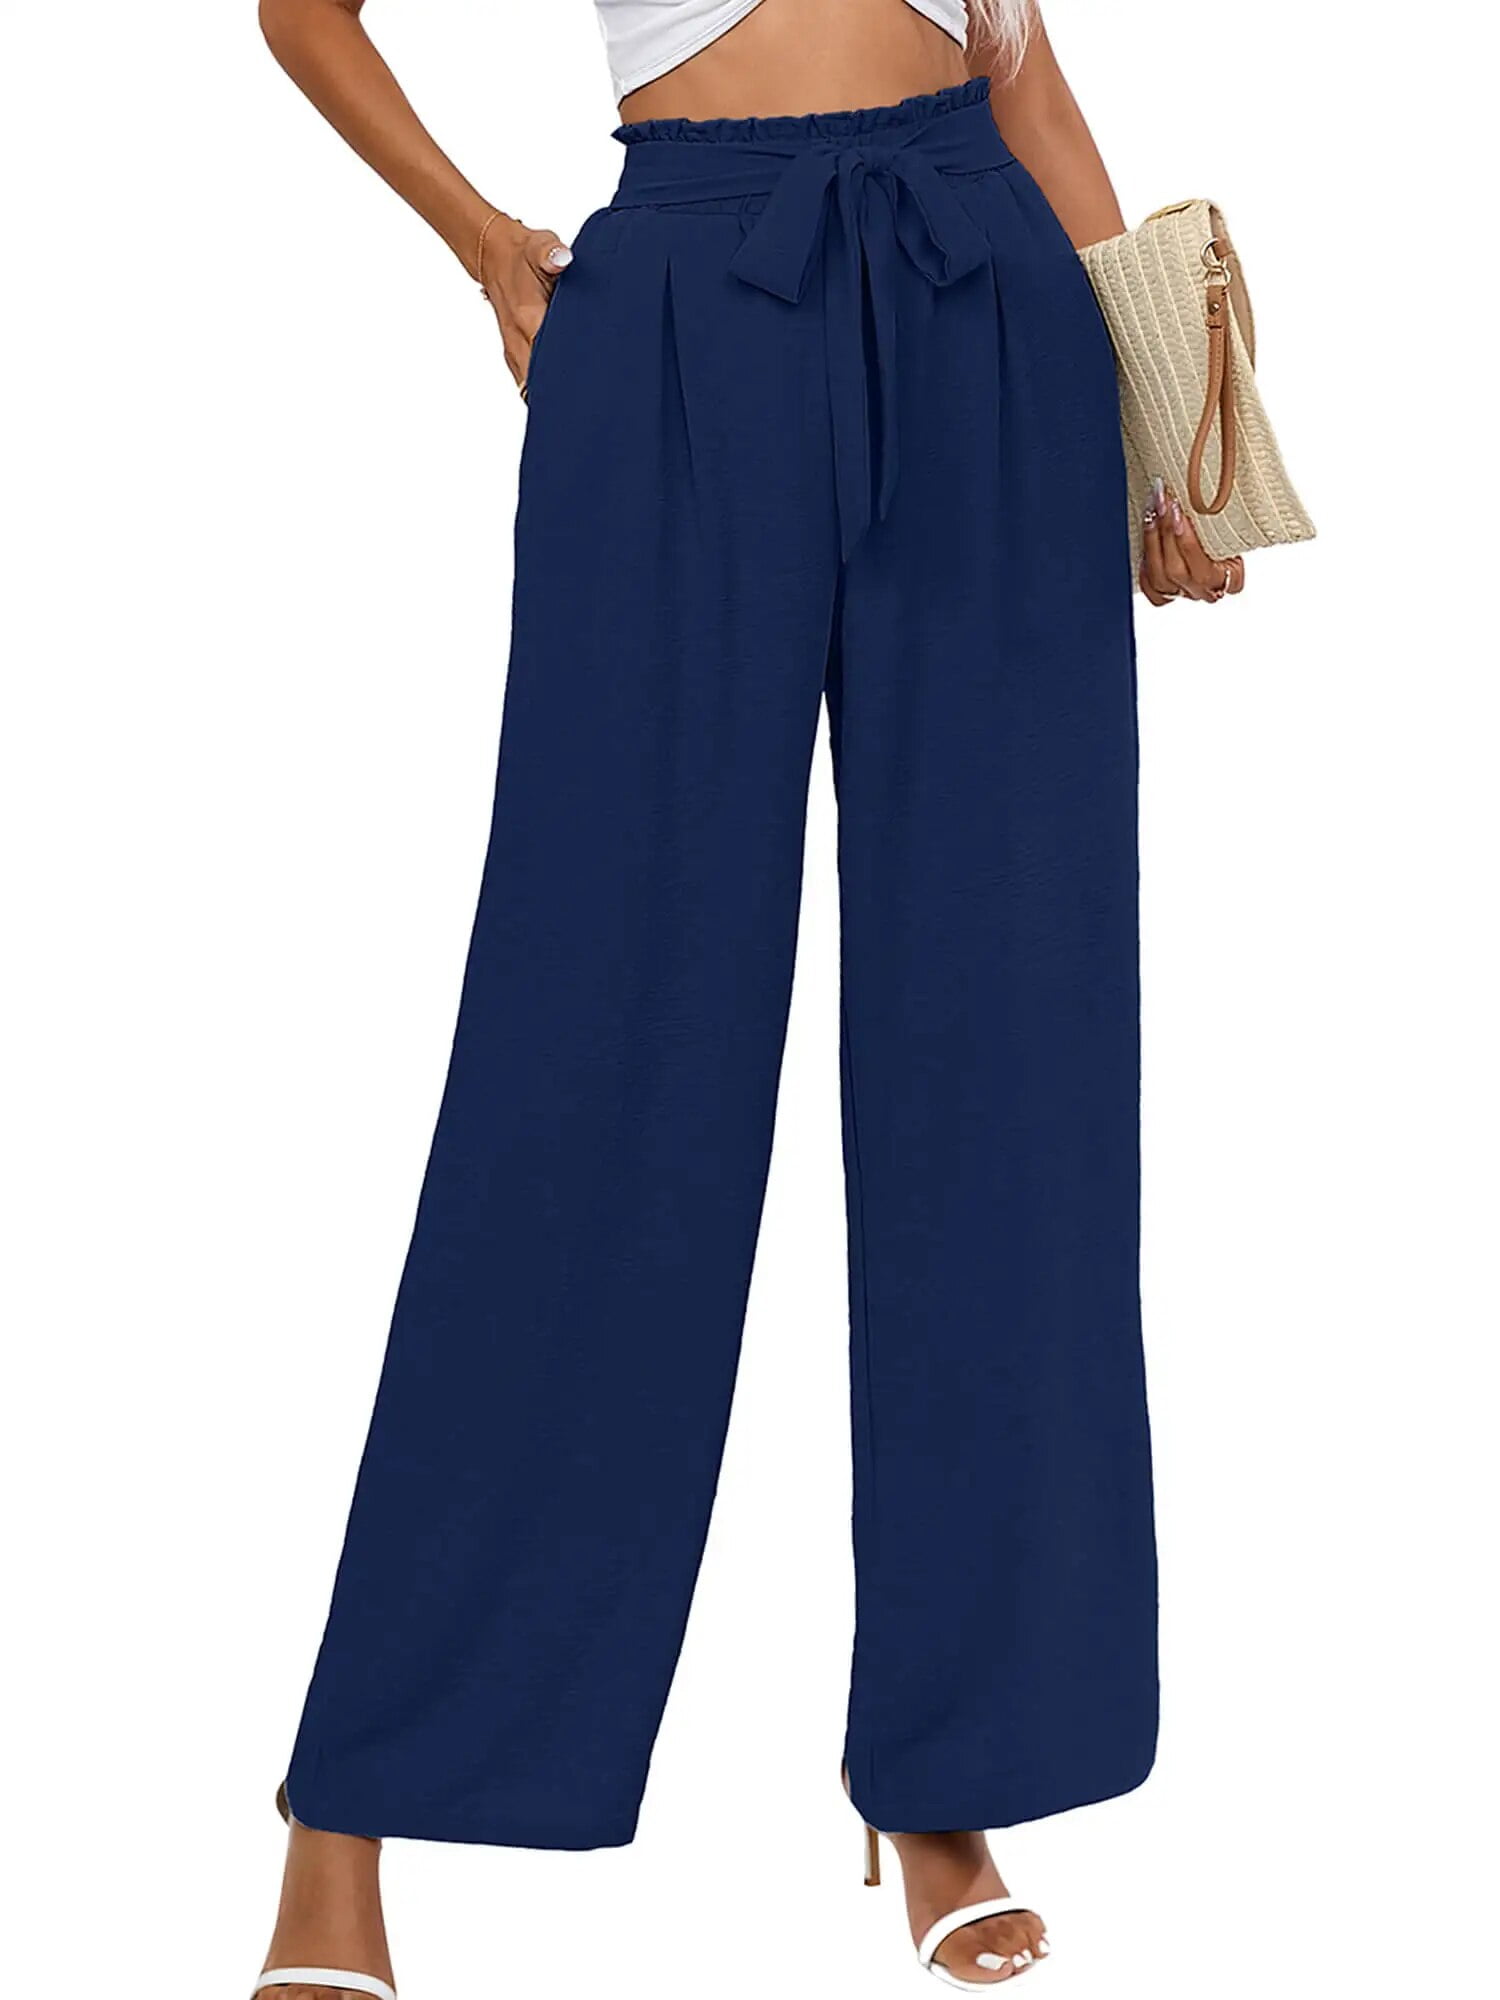 NILLLY Pants for Women Solid Fashion Relaxed High Waist Stretch Wide Leg  Pants with Pockets Sports Pants Ladies Pants Wine / 2XL 